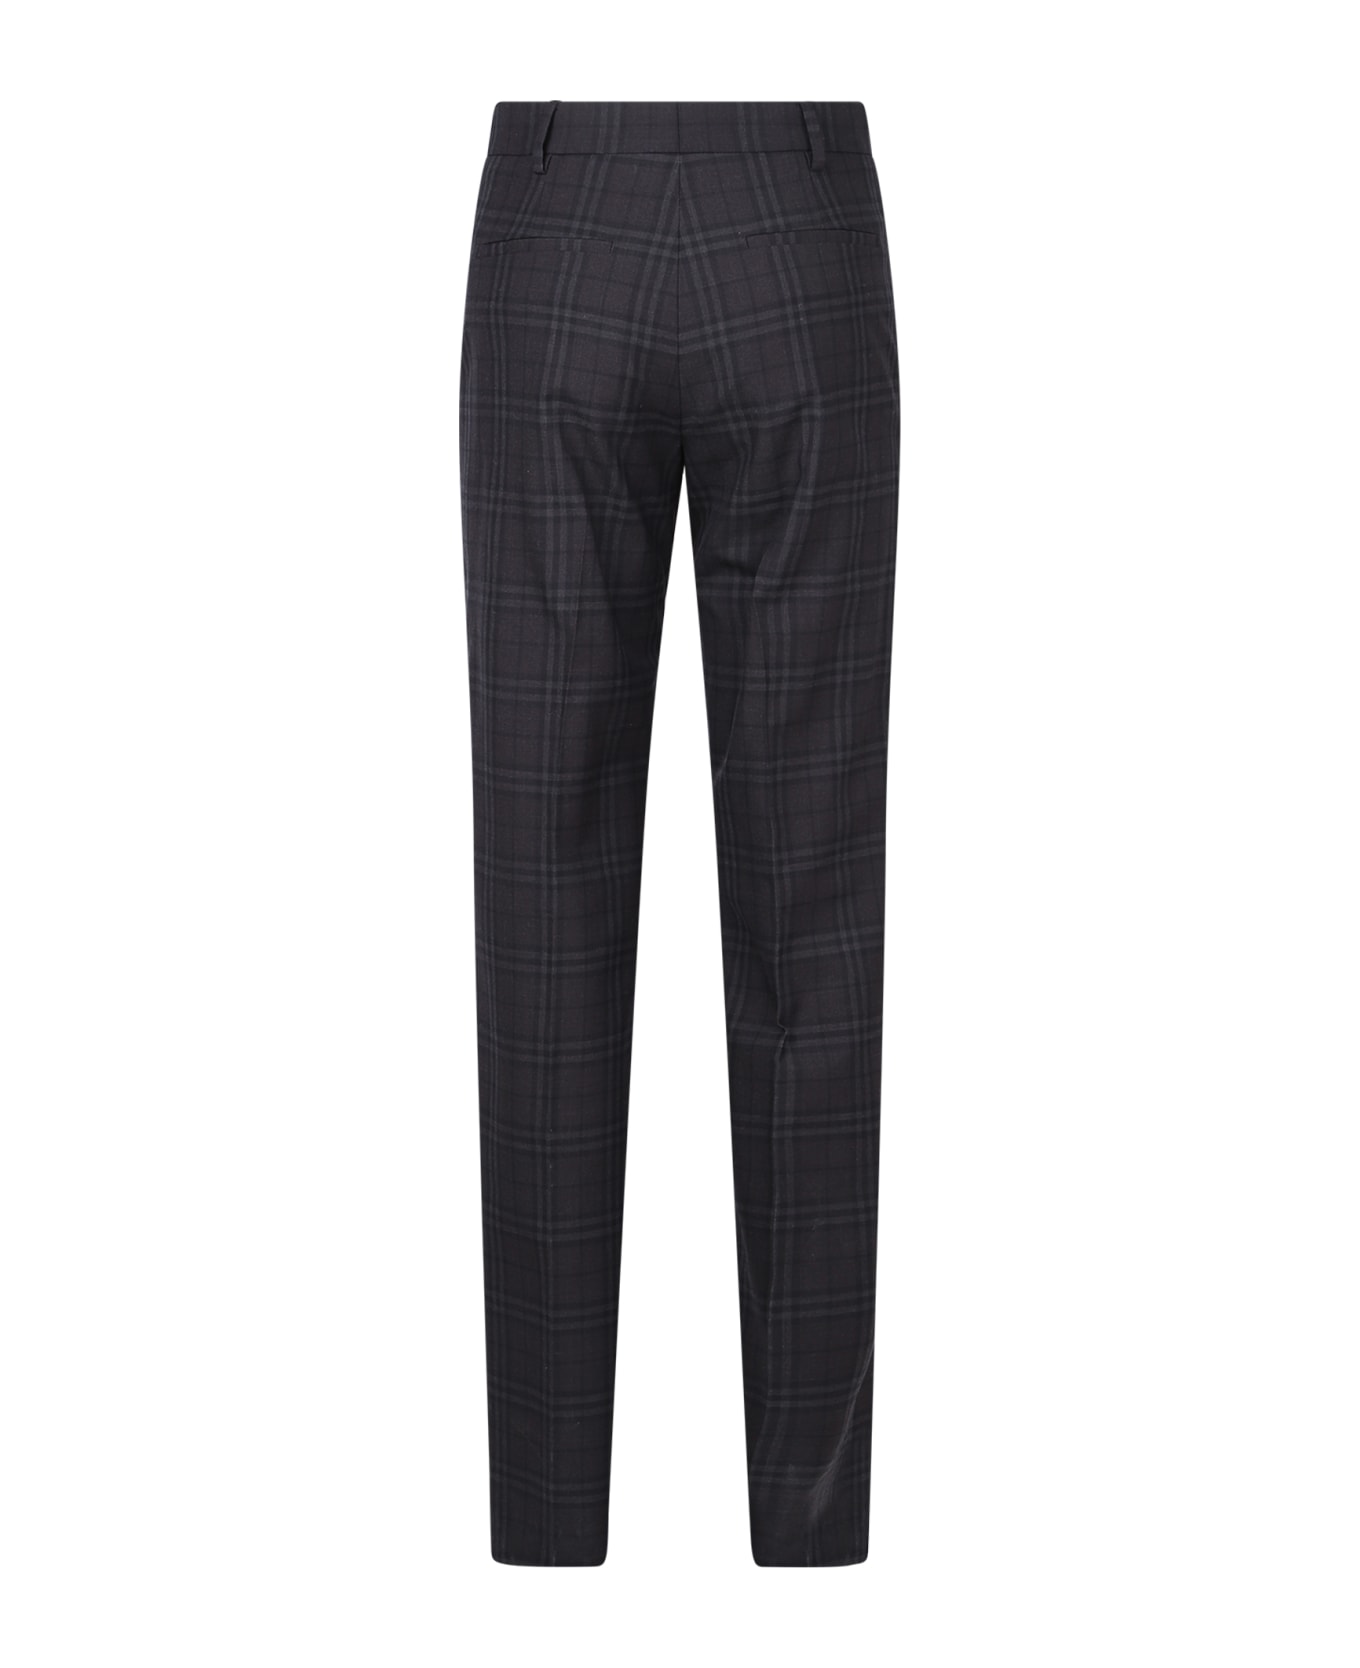 Burberry Slim Fit Trousers - Grey